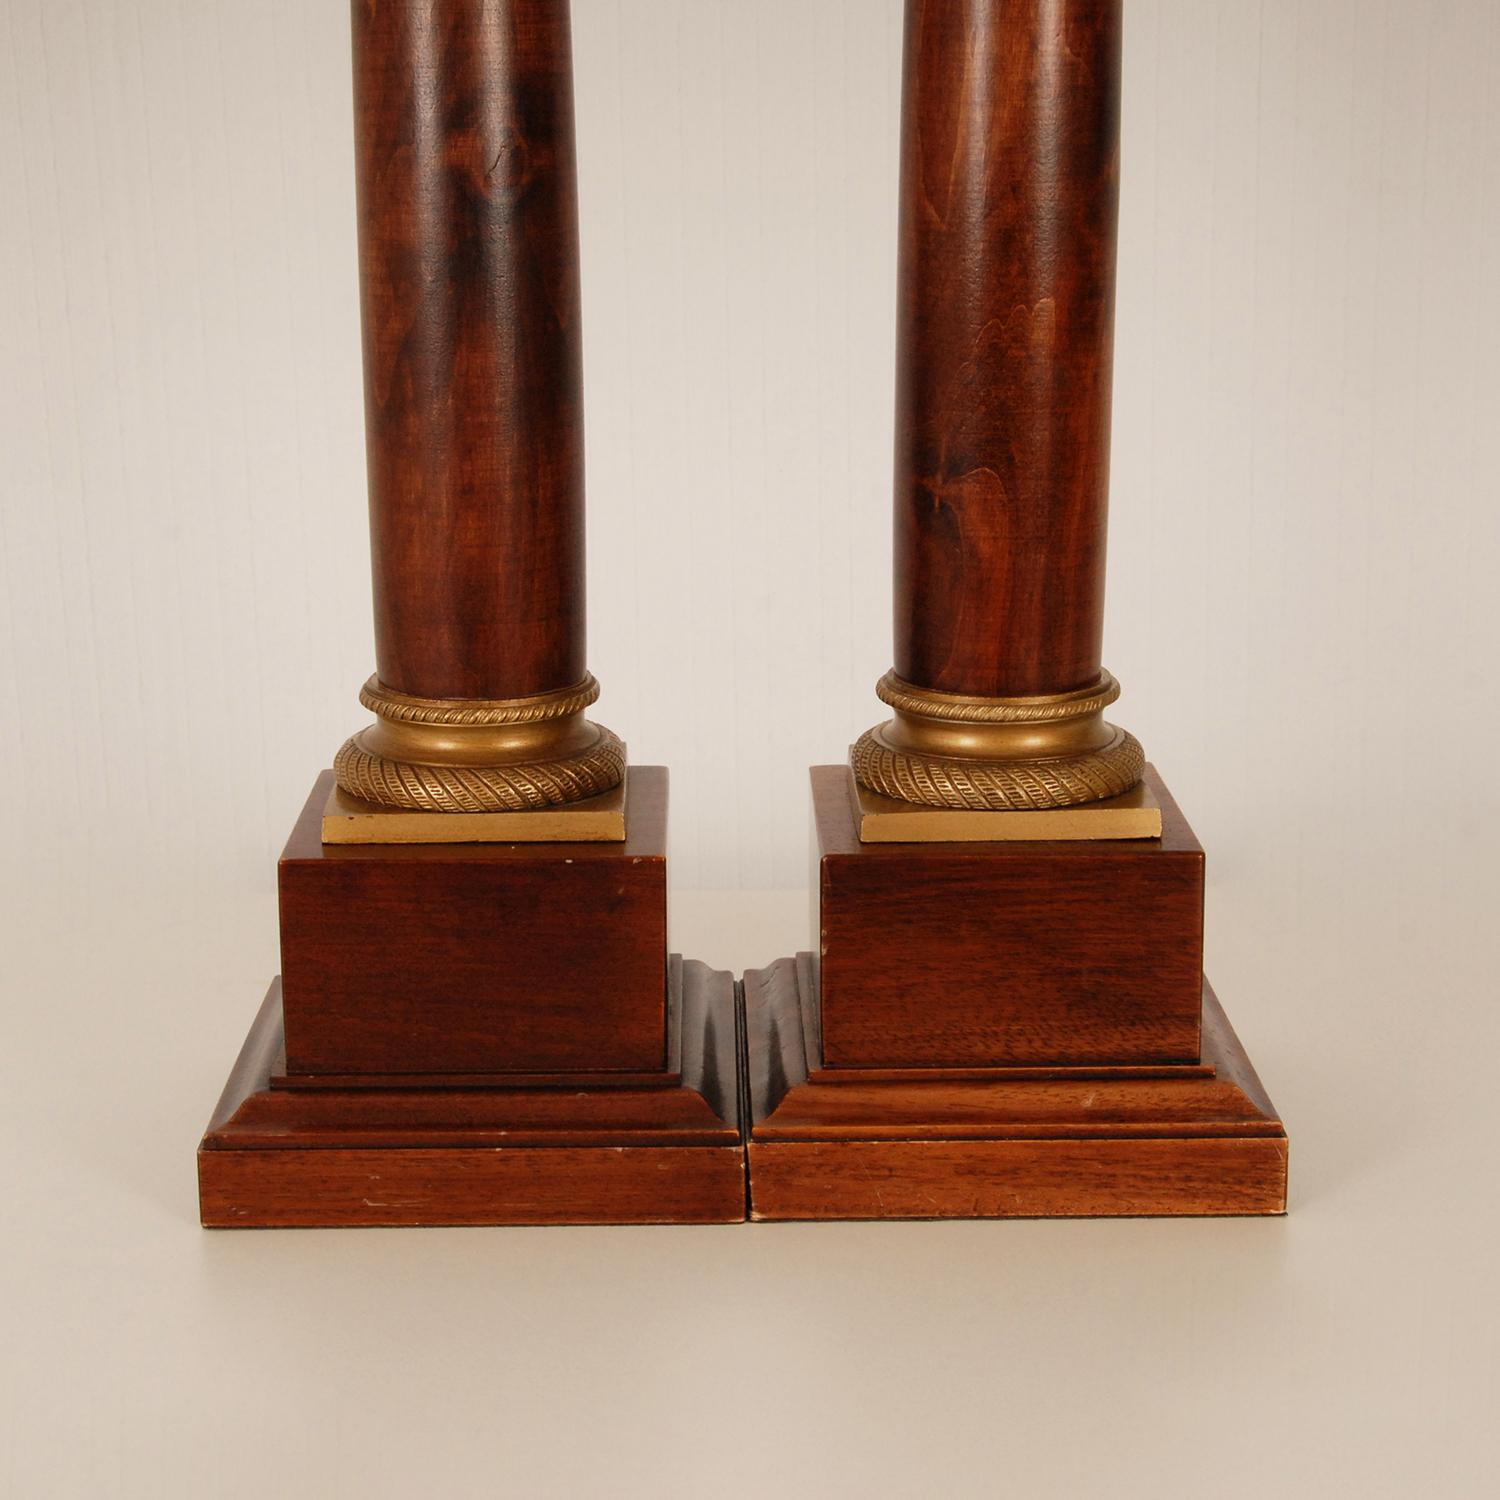 Late 20th Century Empire Table Lamps Regency Gold Gilt Bronze Mahogany Column Lamps French a pair